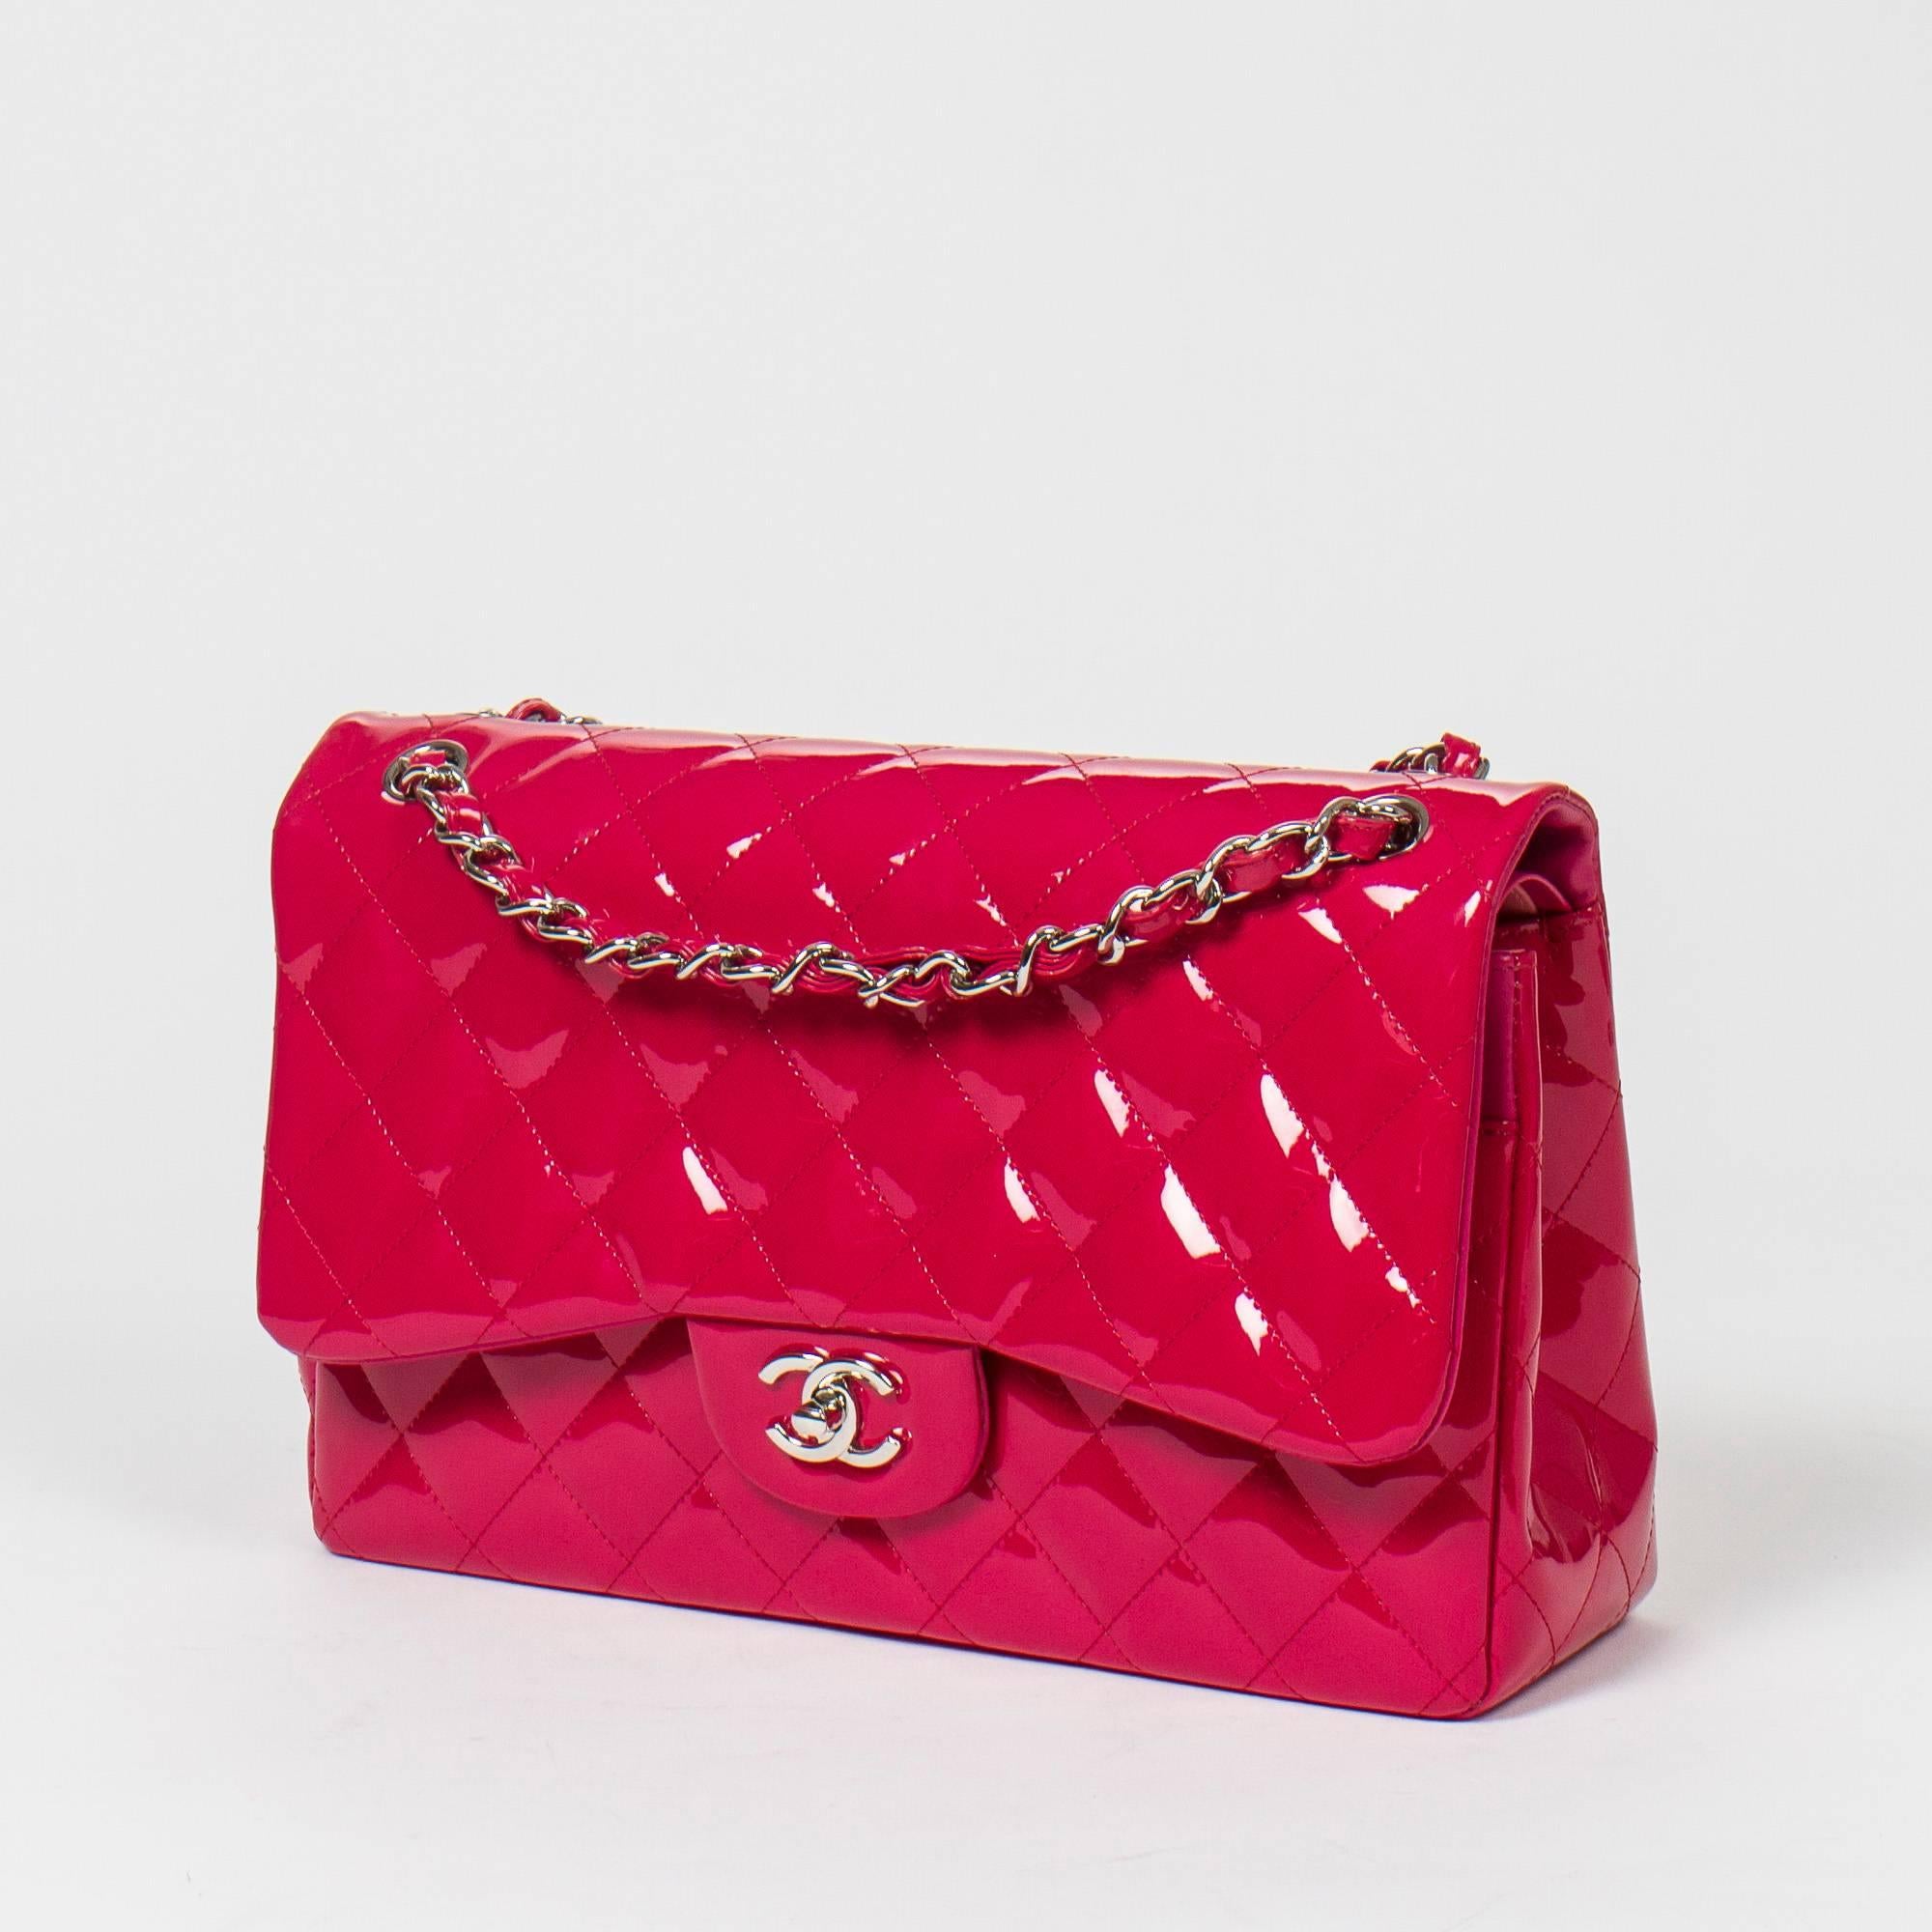 Jumbo in fuschia pink quilted patent leather with chain strap interlaced with patent leather, signature CC turnlock and silver tone hardware. Back slip pocket. Bicolor fuschia and light pink leather lined interior with 3 compartments. 